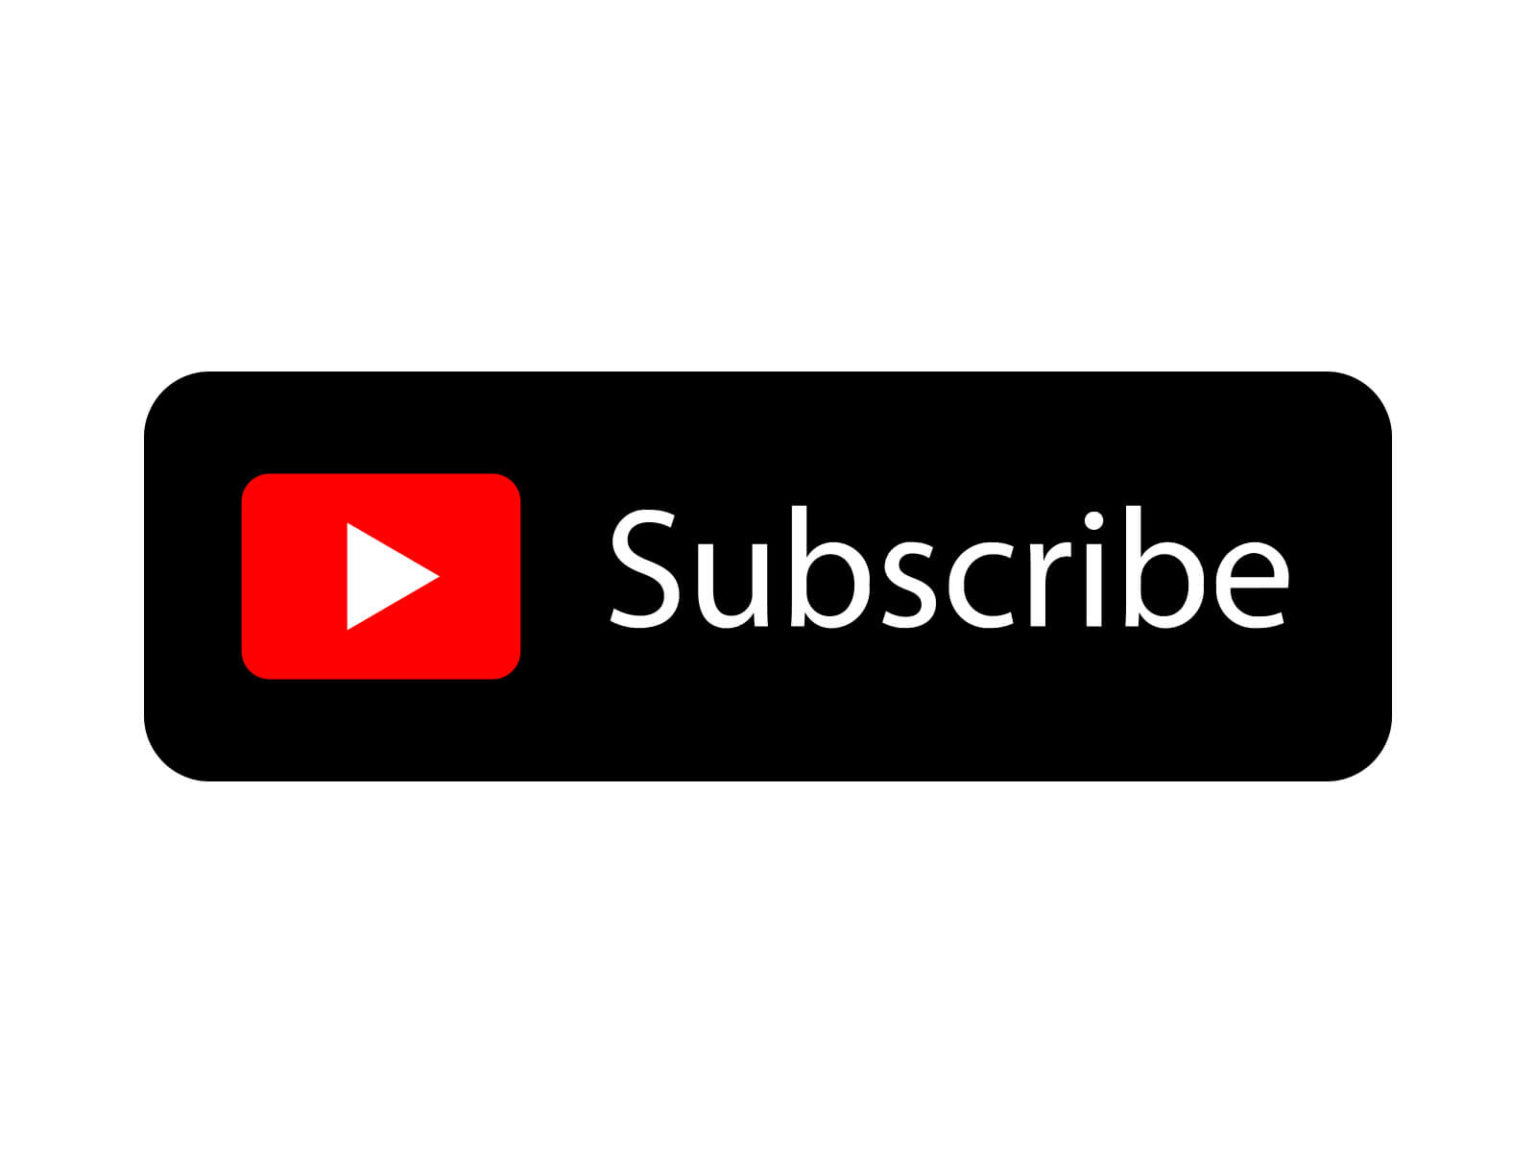 youtube subscribe button image free download